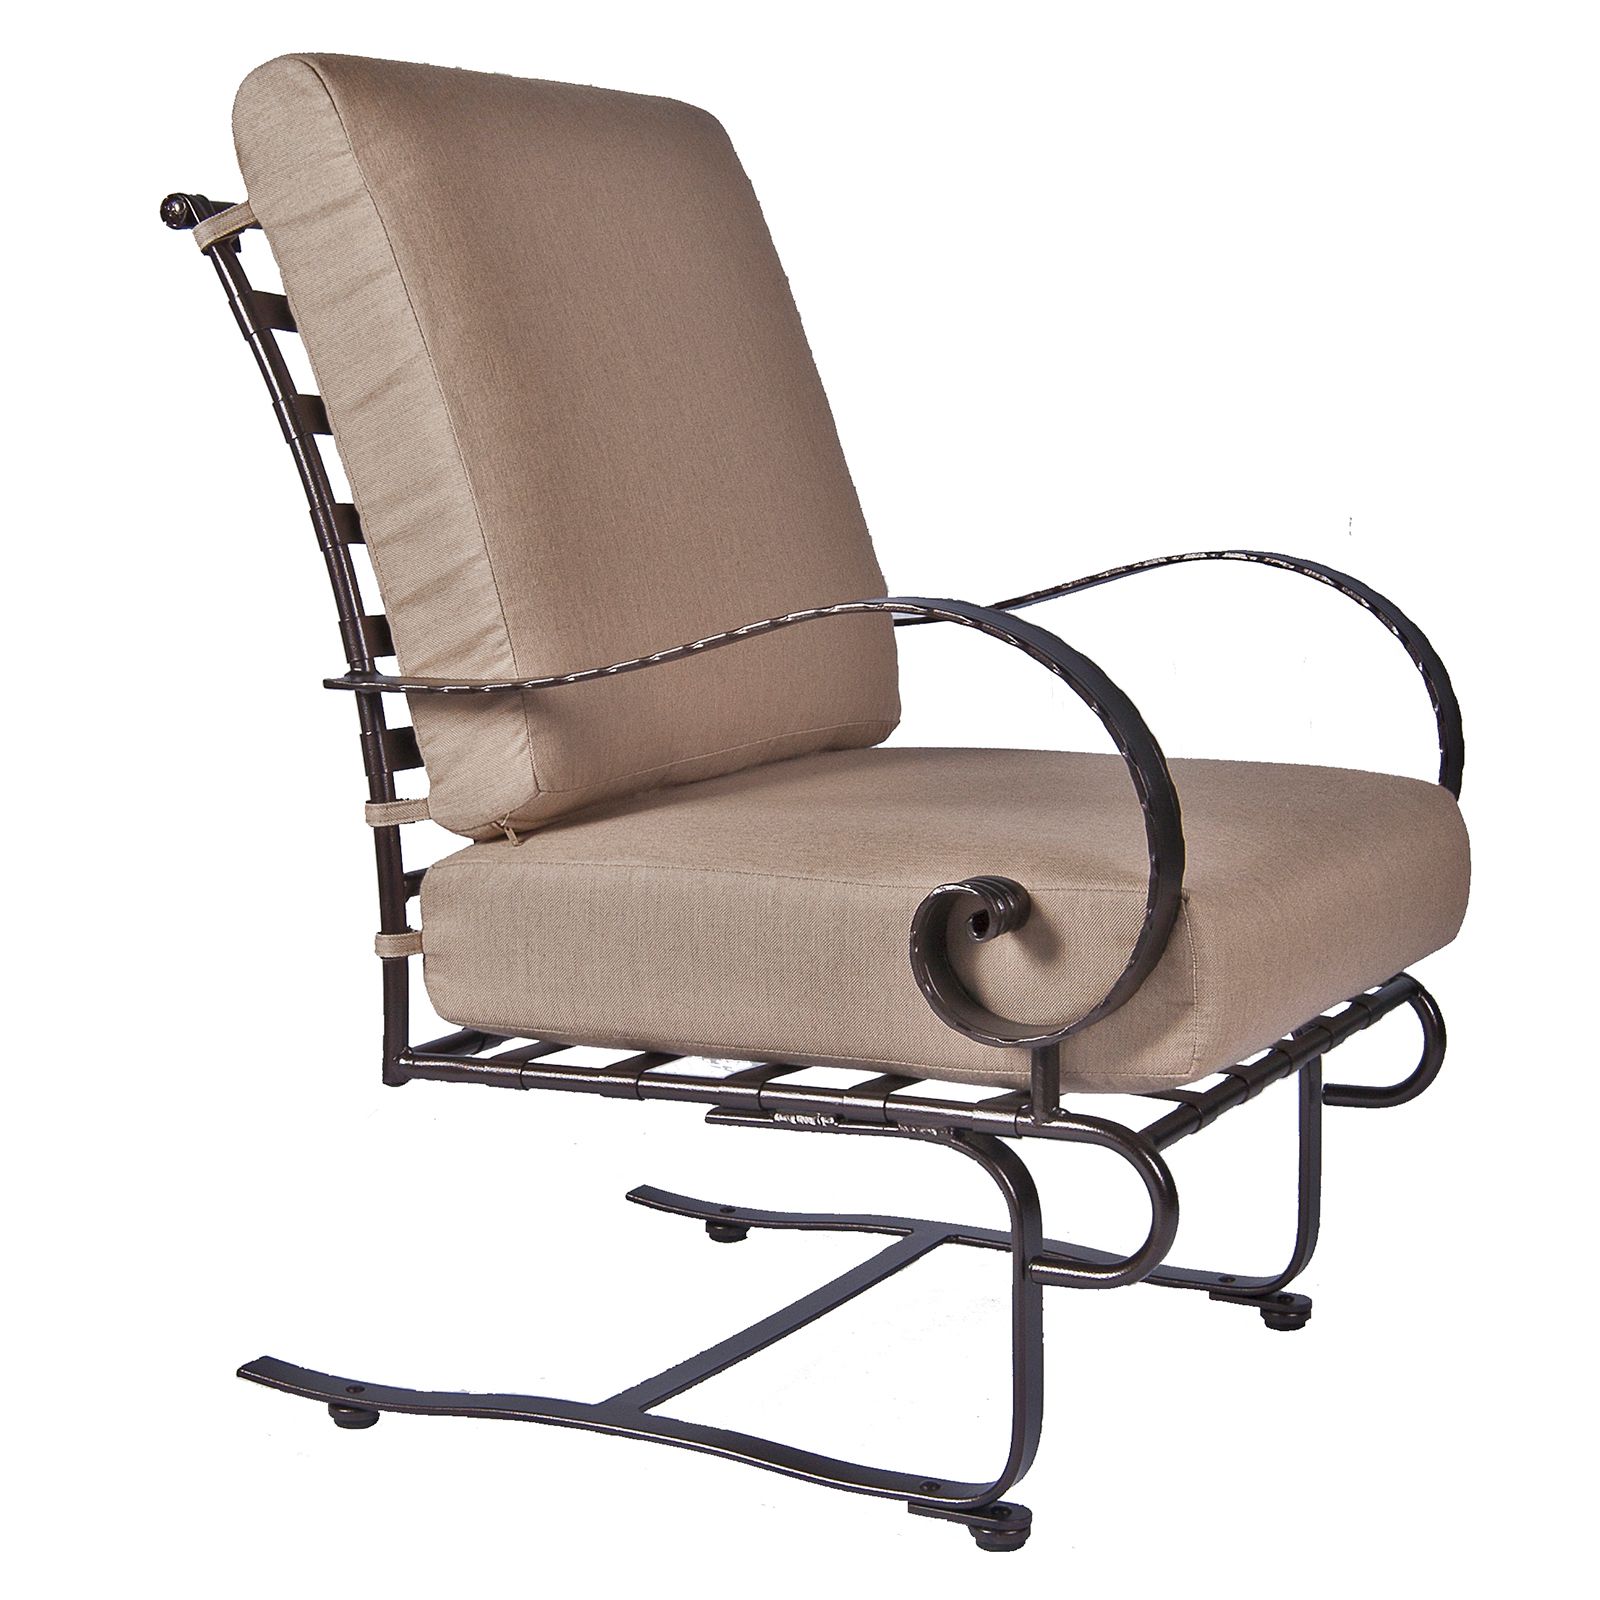 Classico W Spring Base Lounge Chair